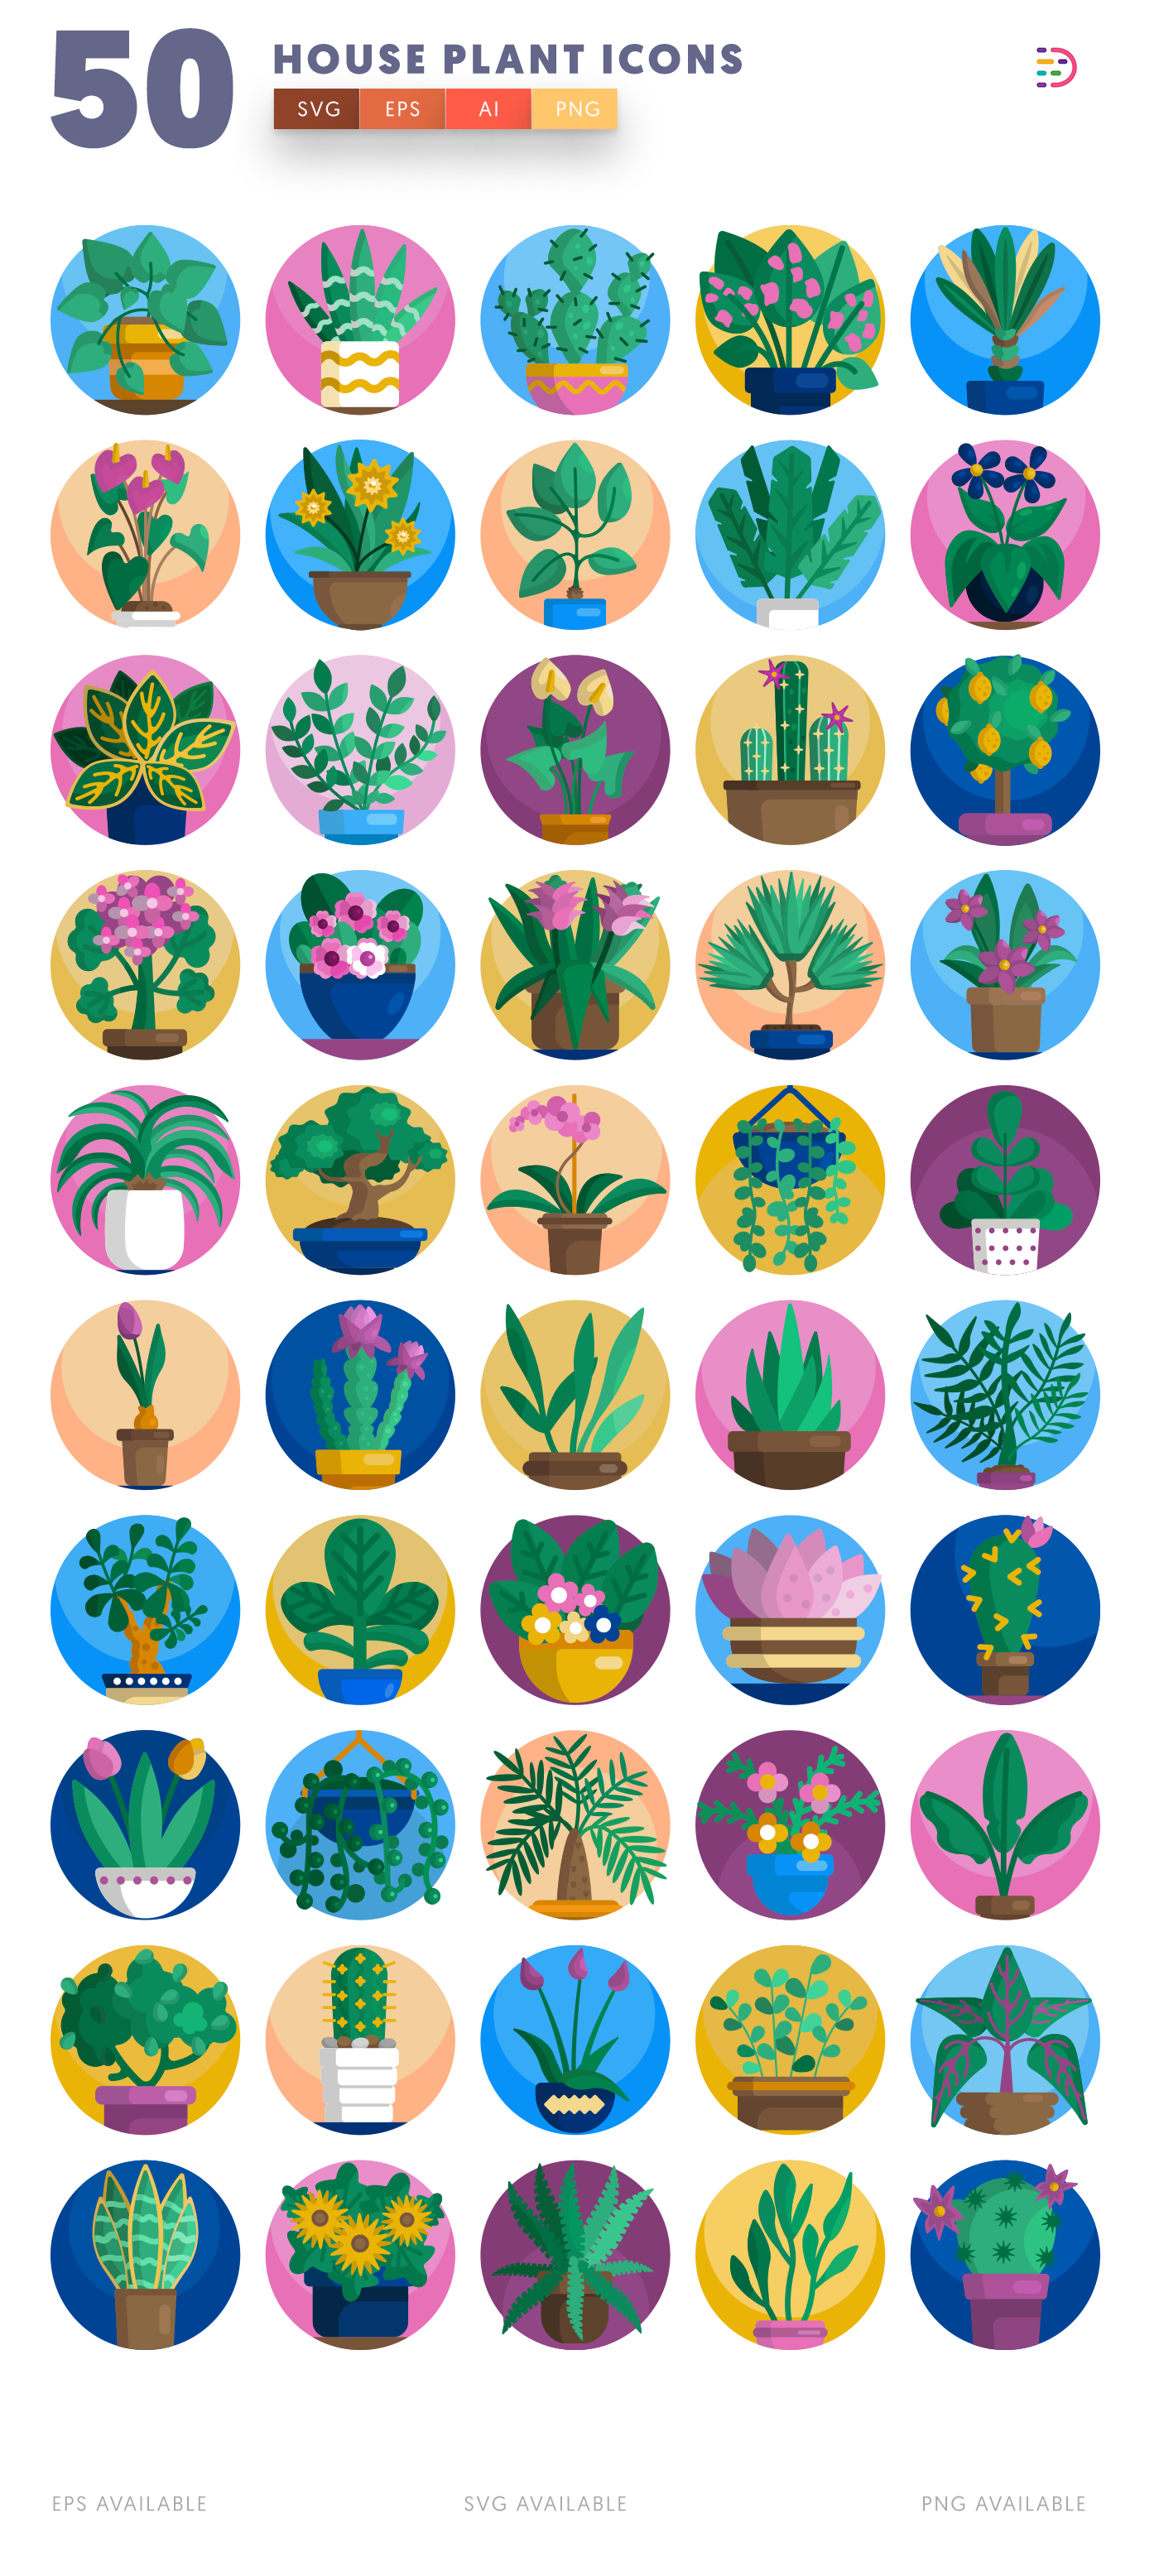 Design ready House Plant Icons